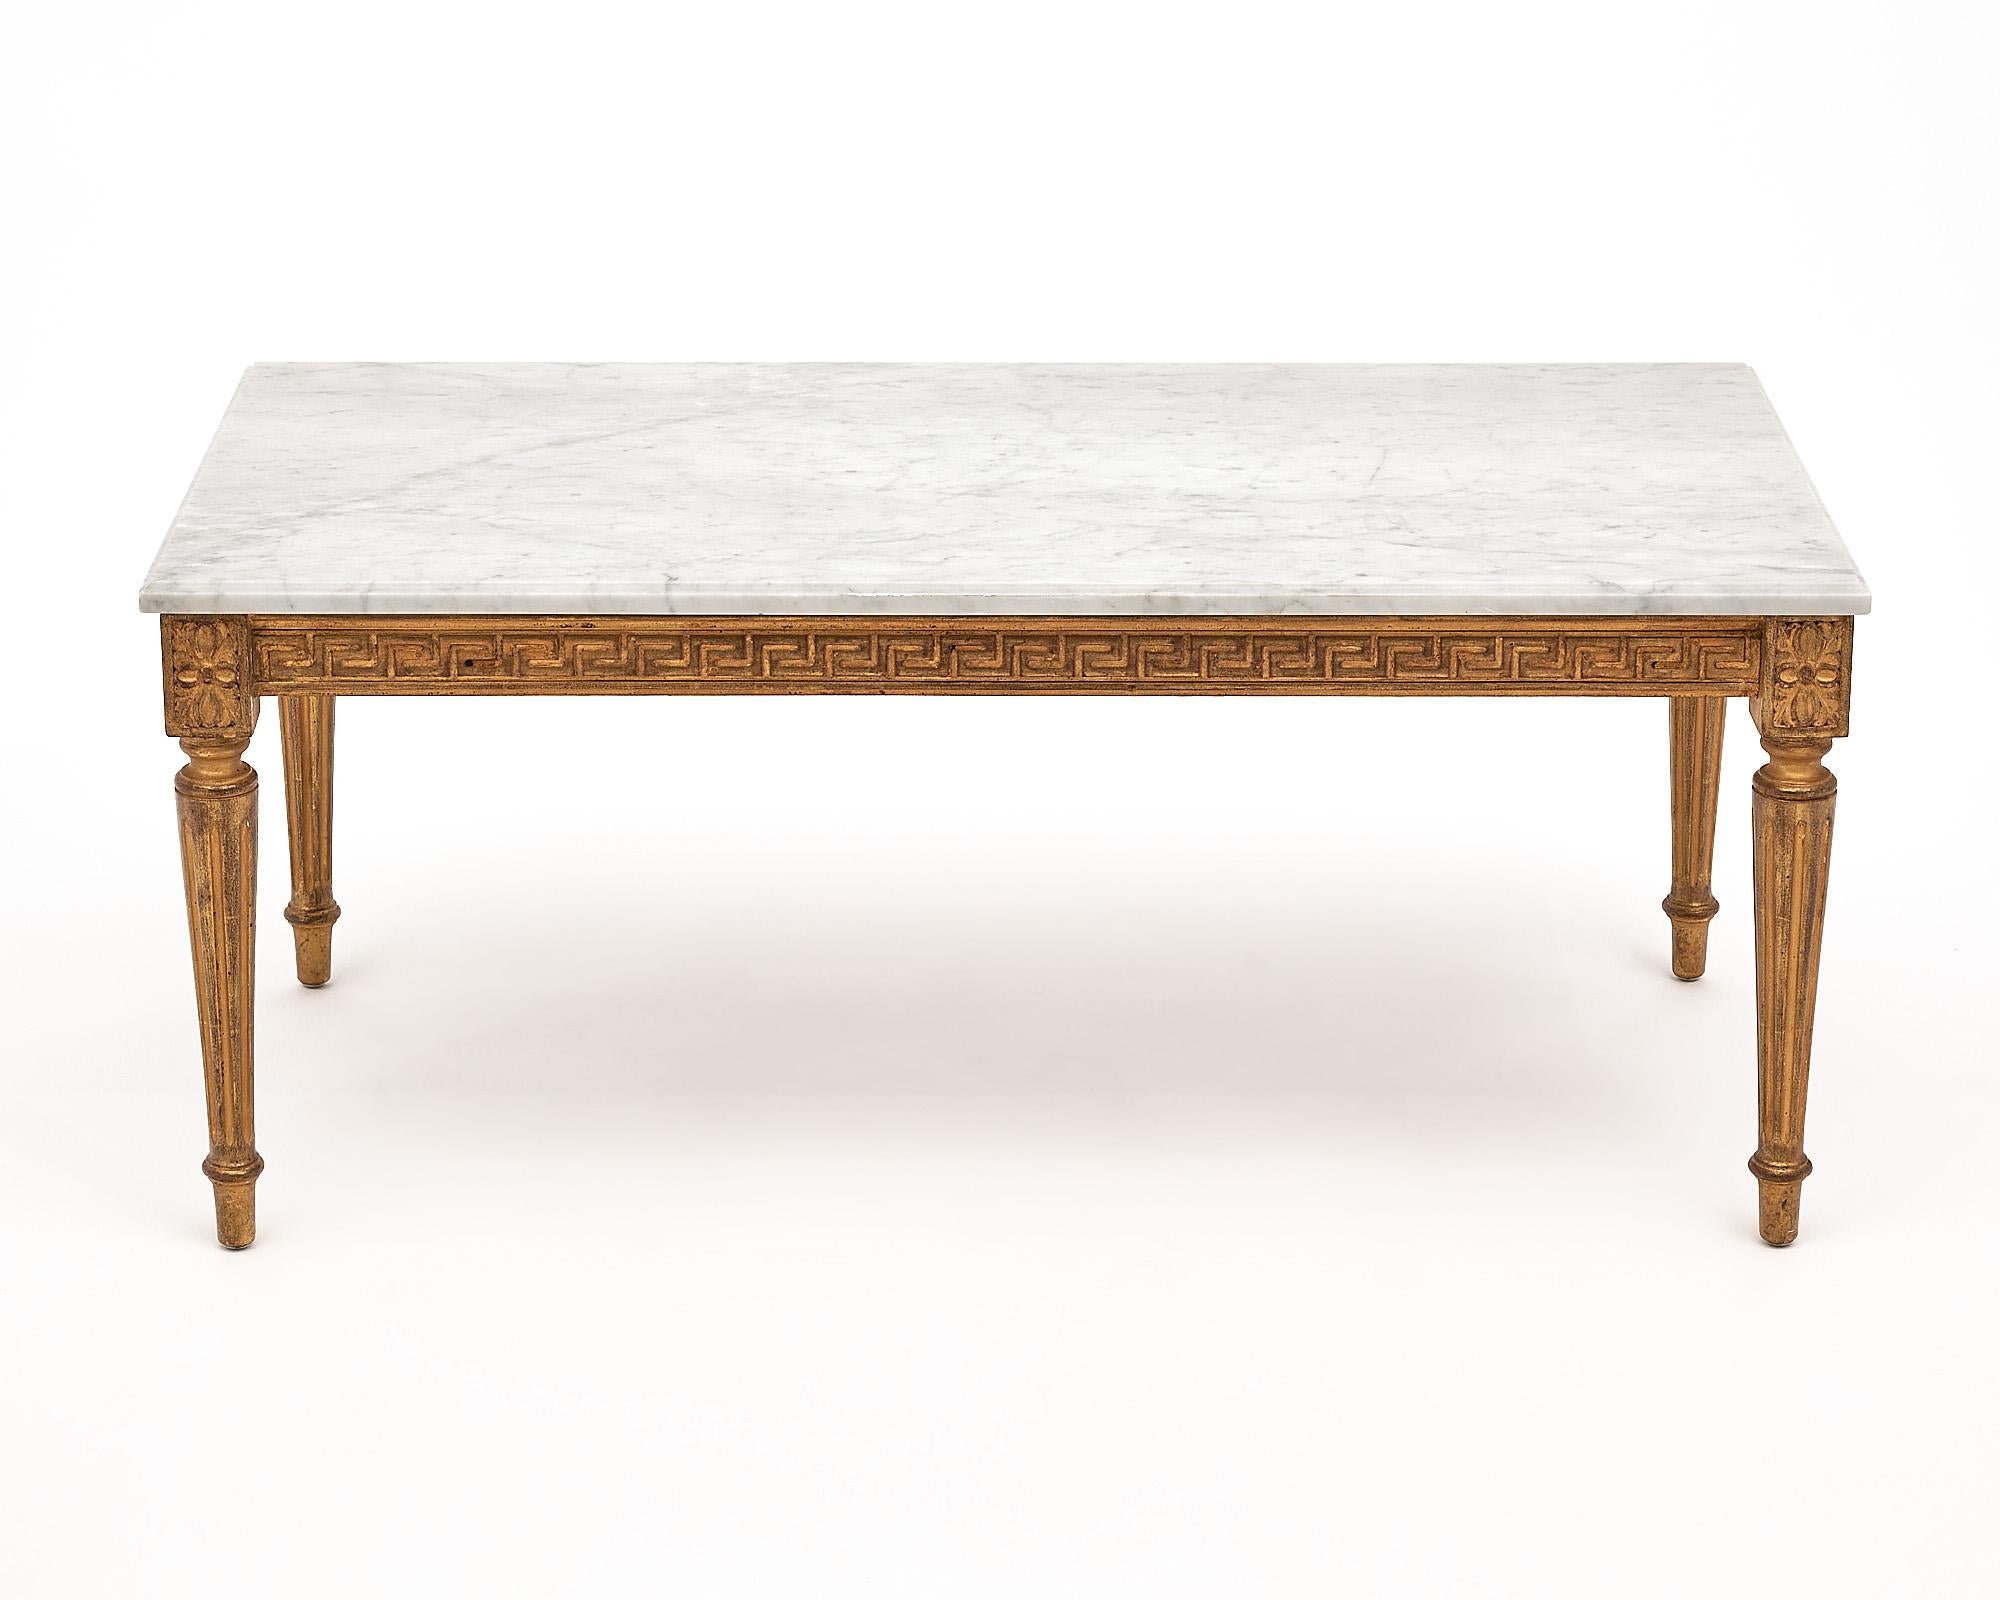 Early 20th Century Louis XVI Style Coffee Table with Marble Top